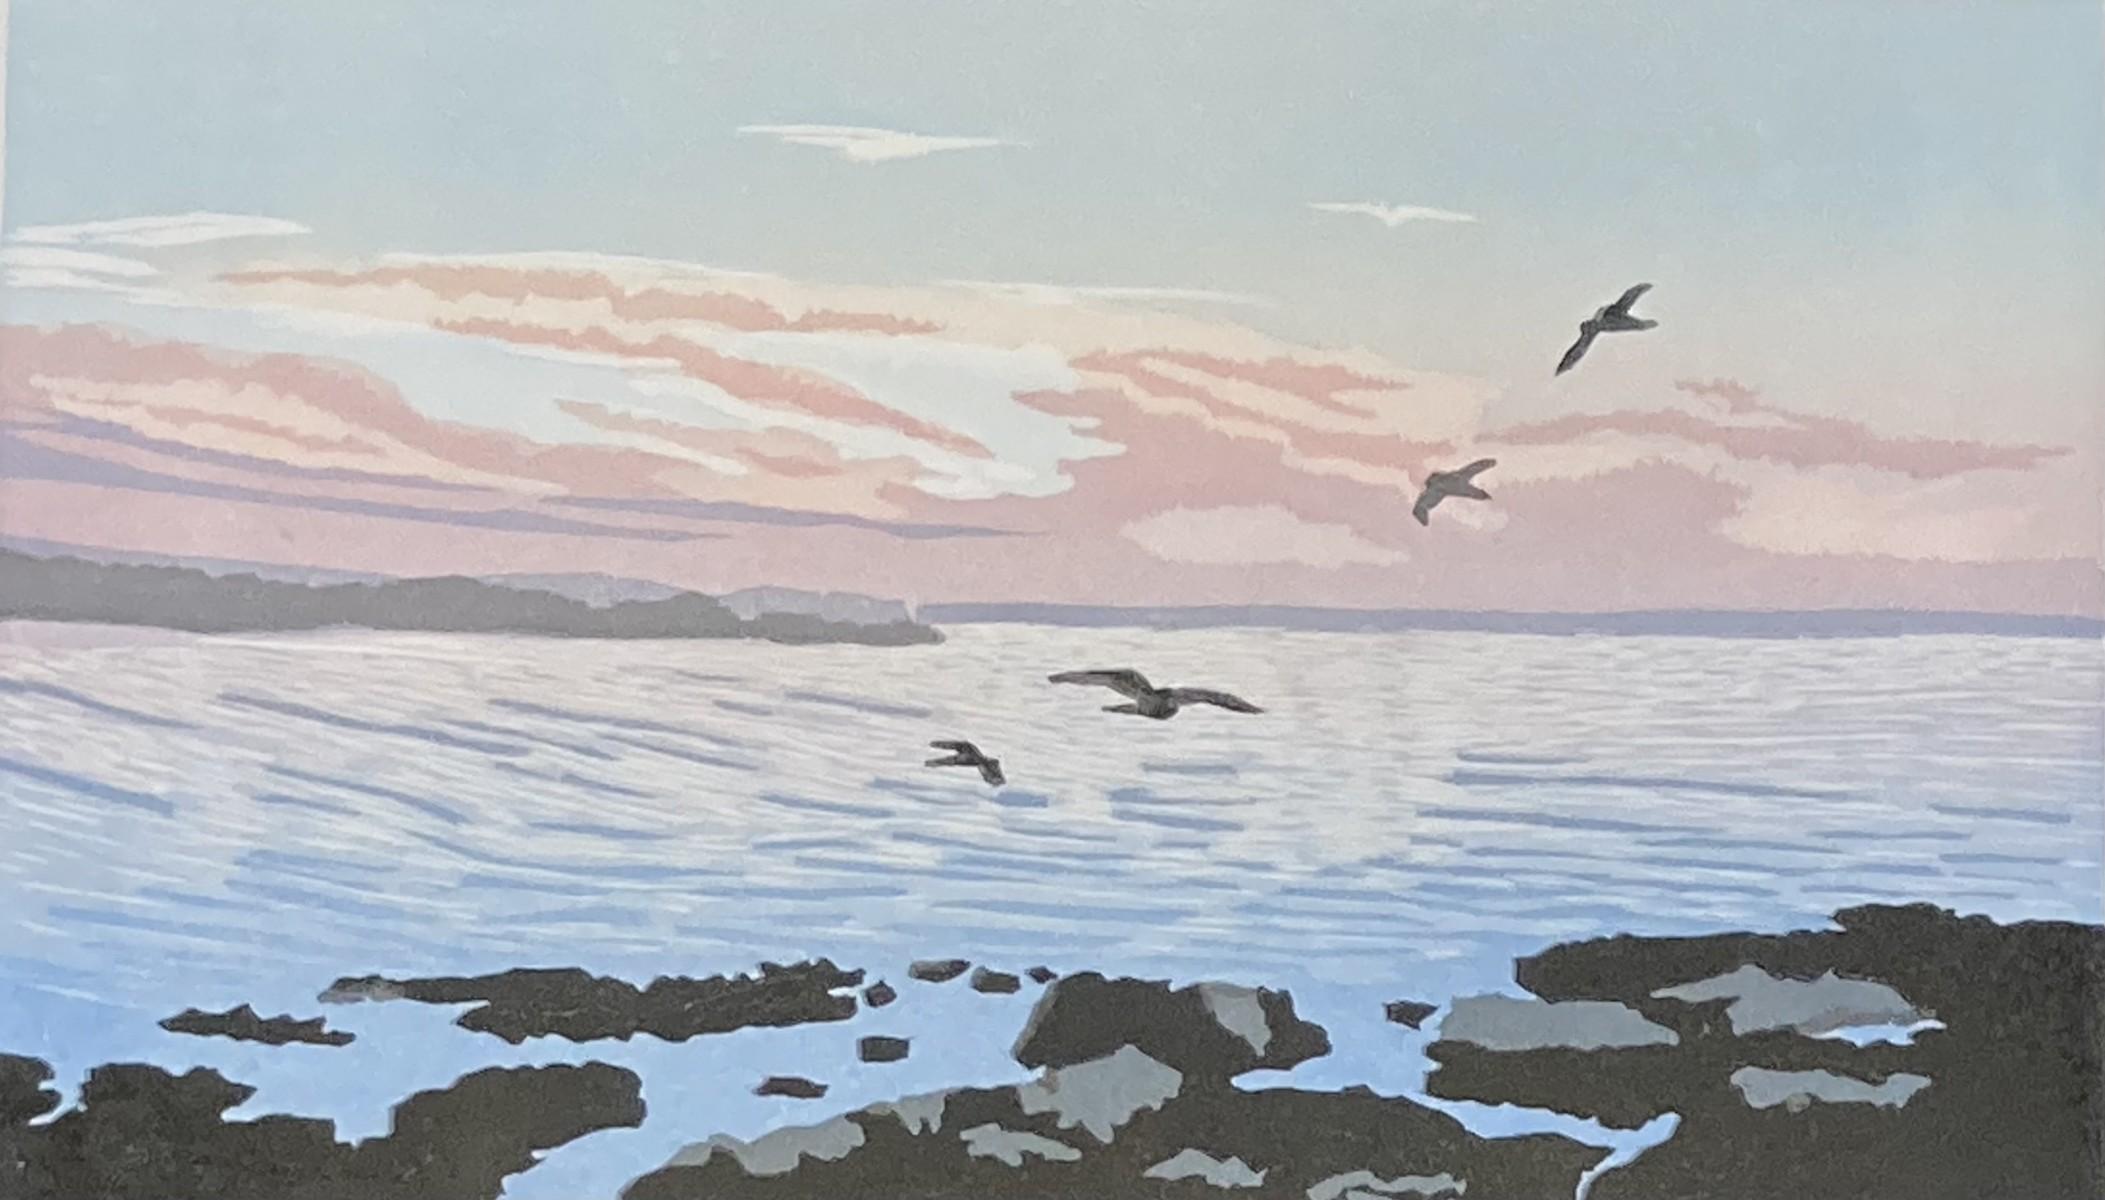 Gulls at Sunset [2022]
limited_edition and hand signed by the artist 
Linocut on paper 
Edition number 1-10
Image size: H:19 cm x W:31 cm
Complete Size of Unframed Work: H:40 cm x W:80 cm x D:0.5cm
Sold Unframed
Please note that insitu images are